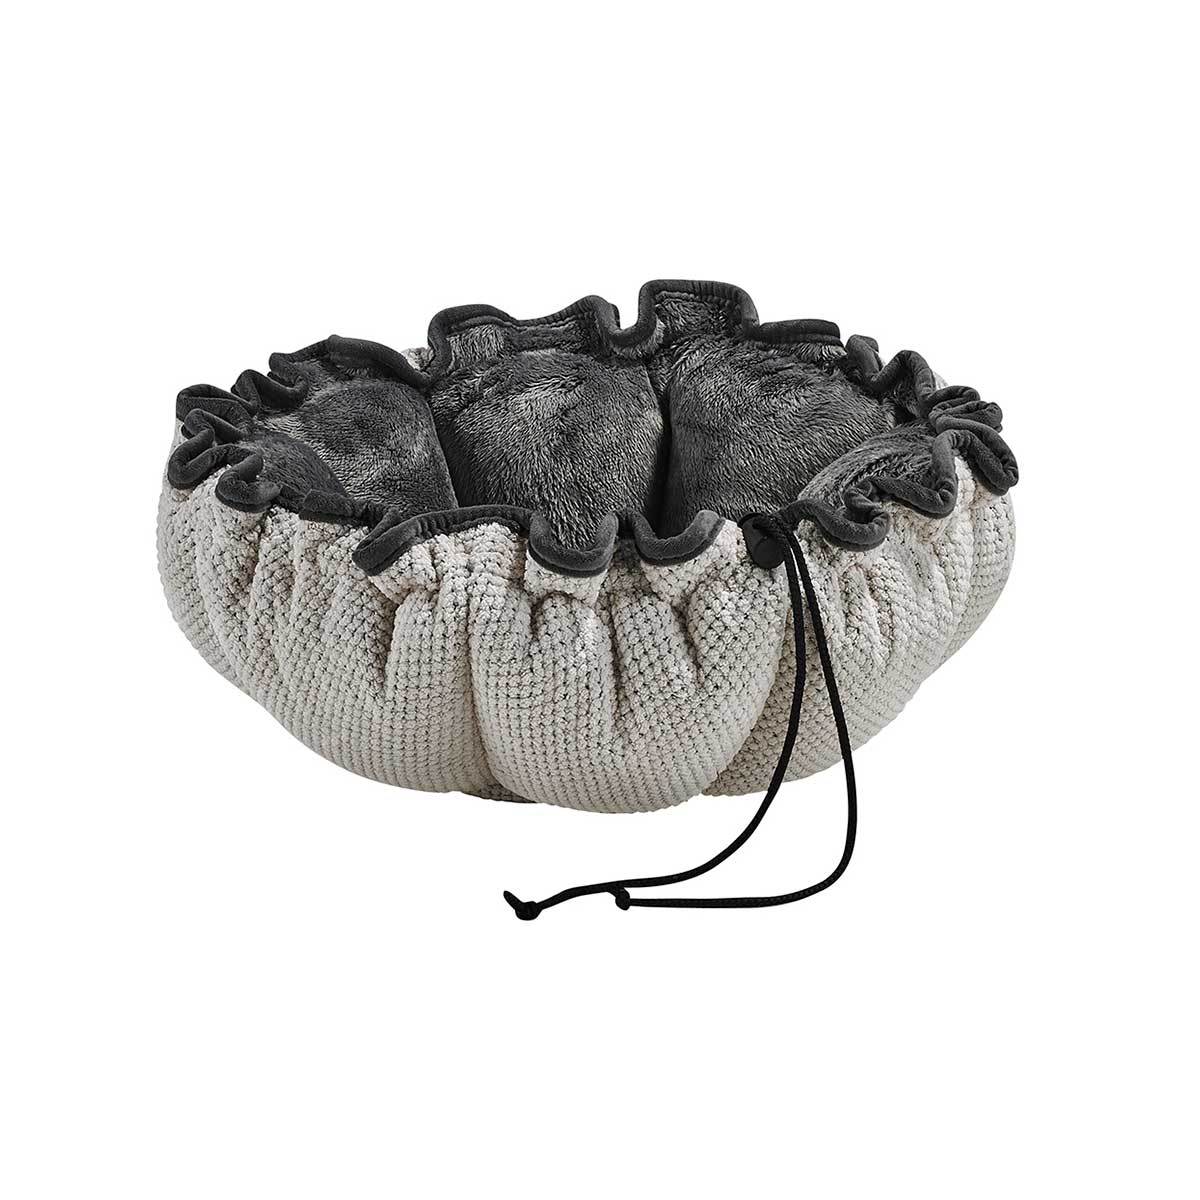 Buttercup Dog Bed, Aspen | Pawlicious & Company